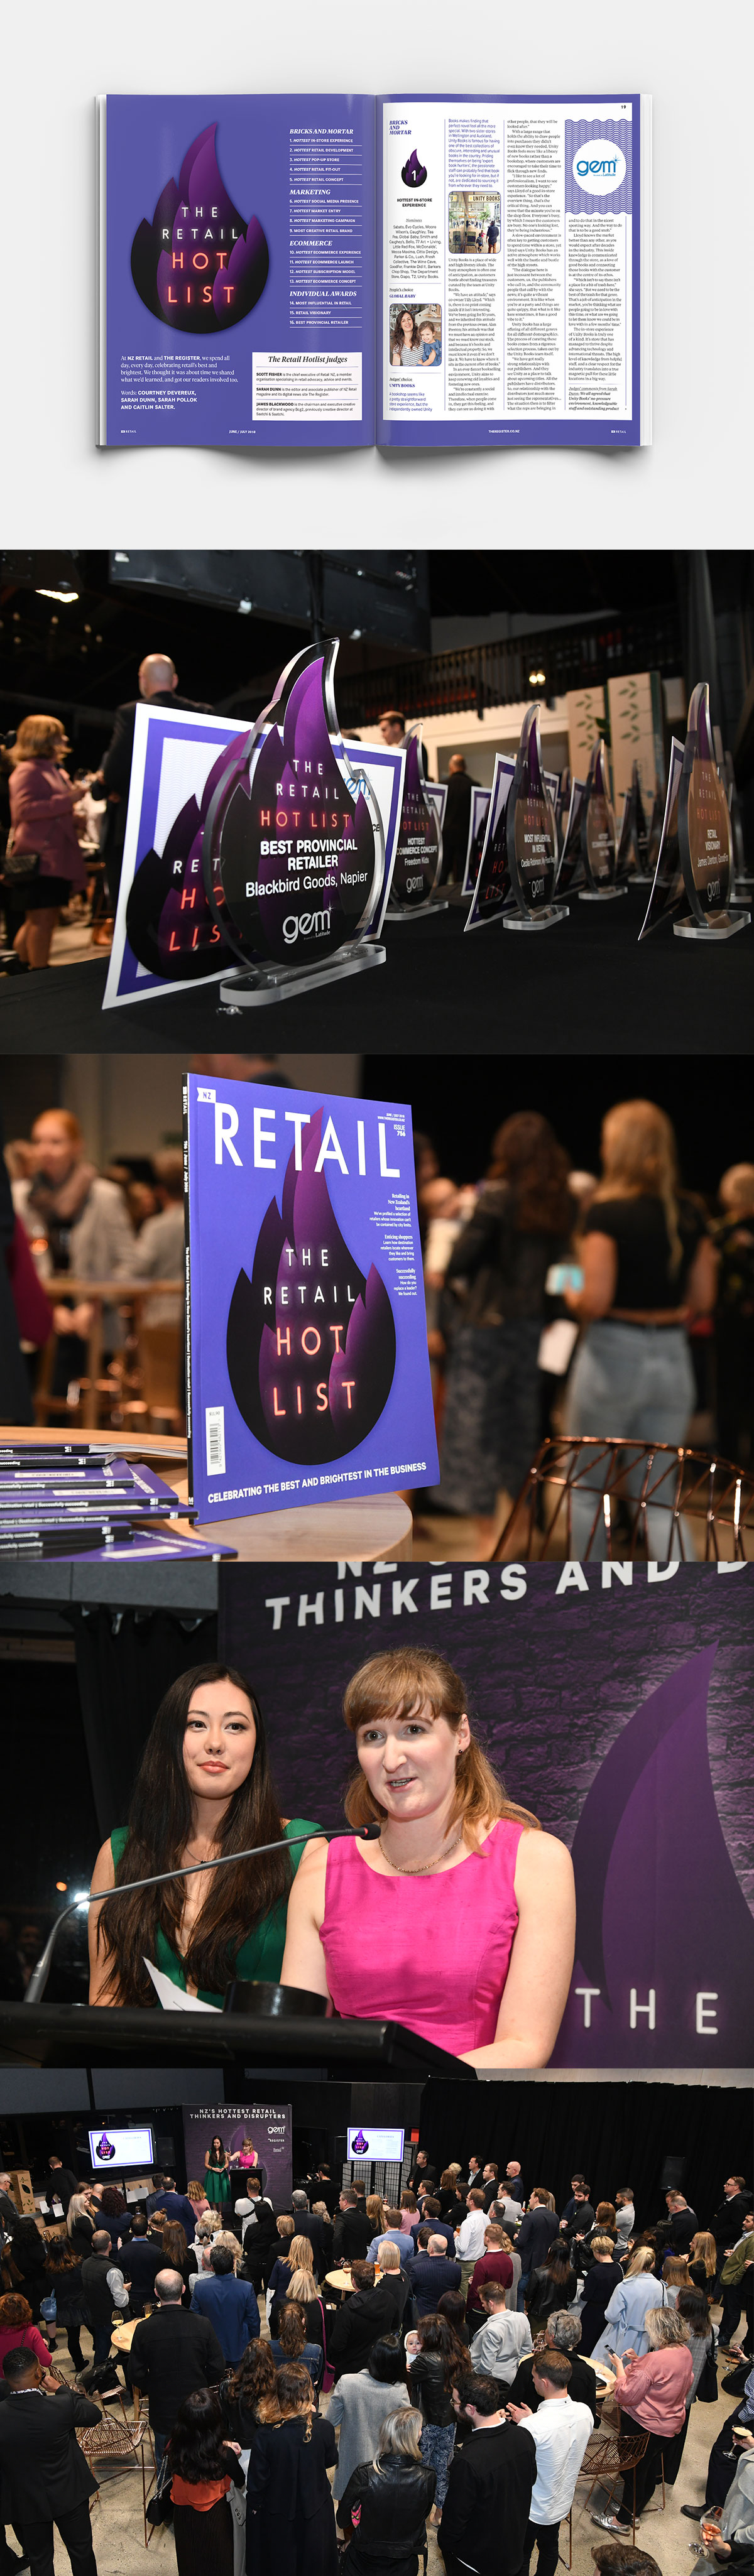 The Retail Hot List